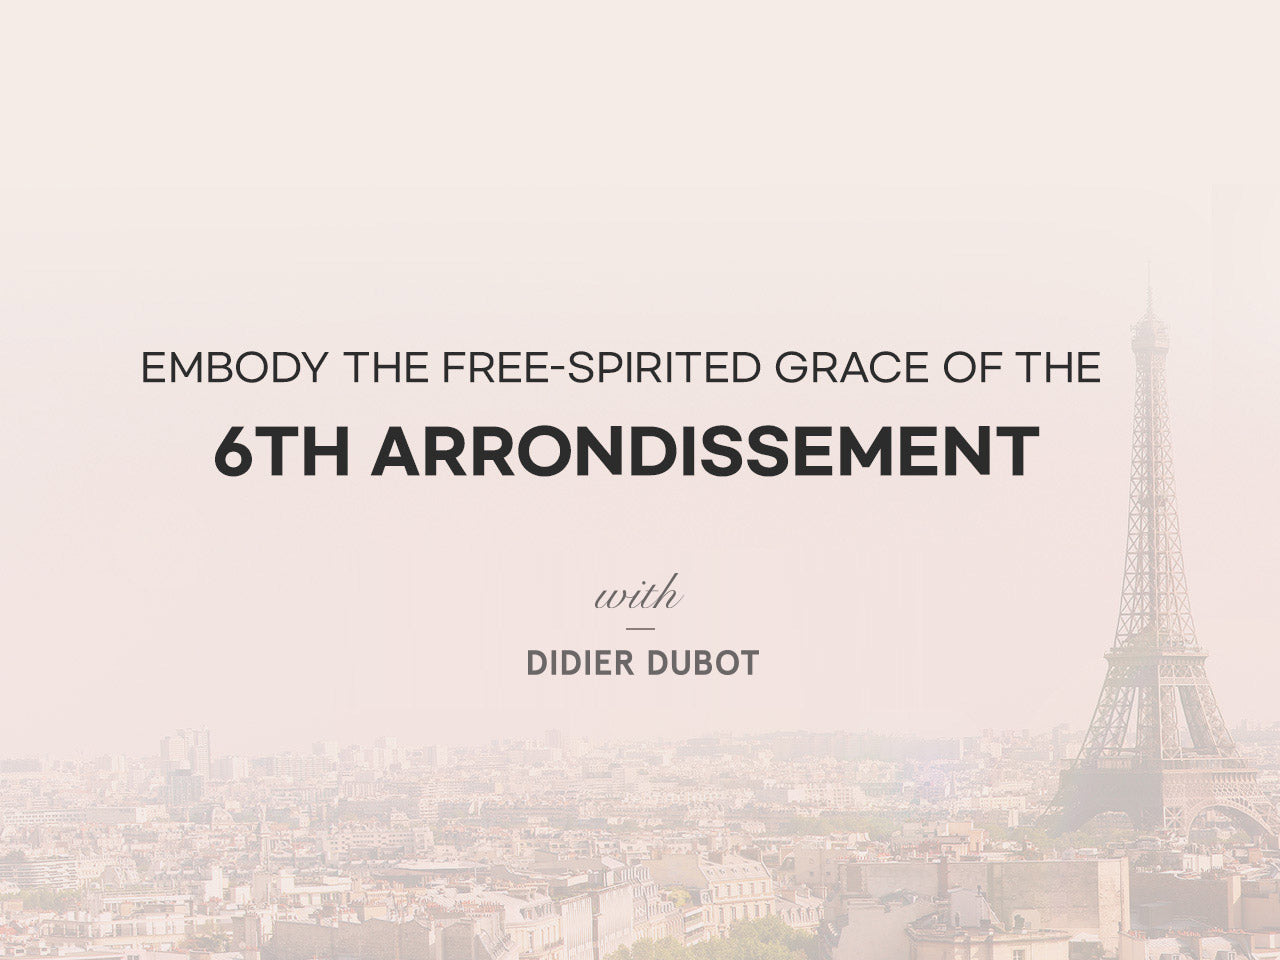 Embody The Free-Spirited Grace Of The 6th Arrondissement With DIDIER DUBOT